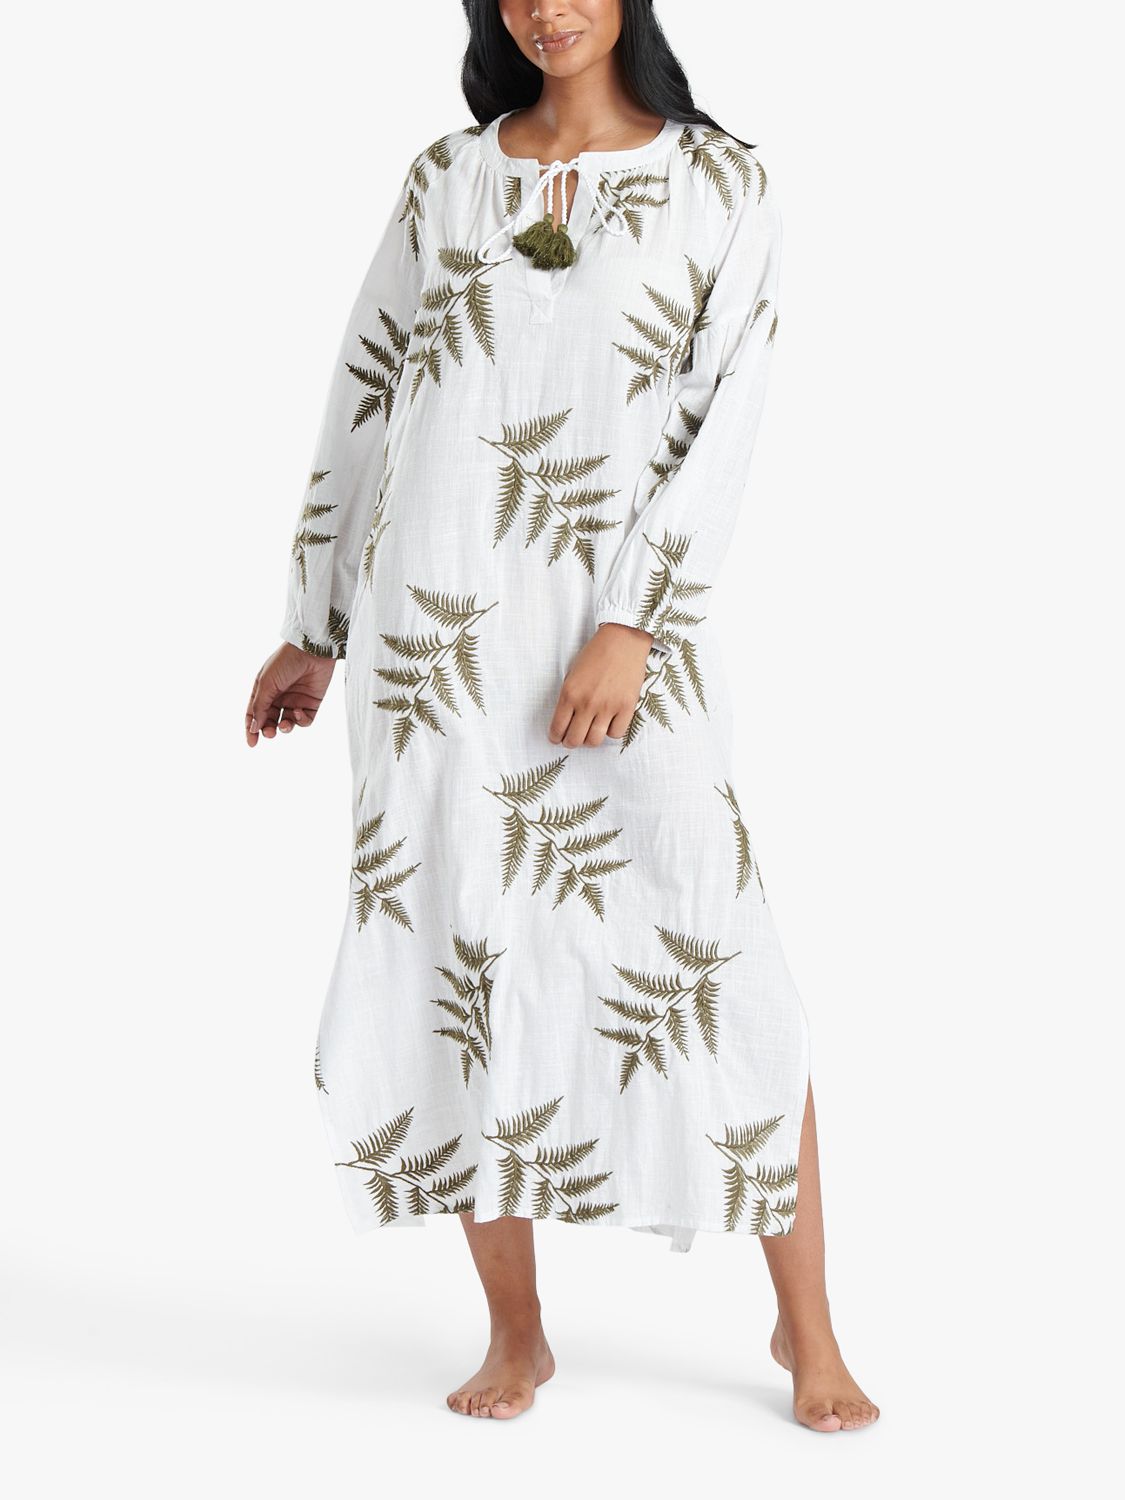 South Beach Embroidered Tie Neck Maxi Beach Dress, White/Olive, 14